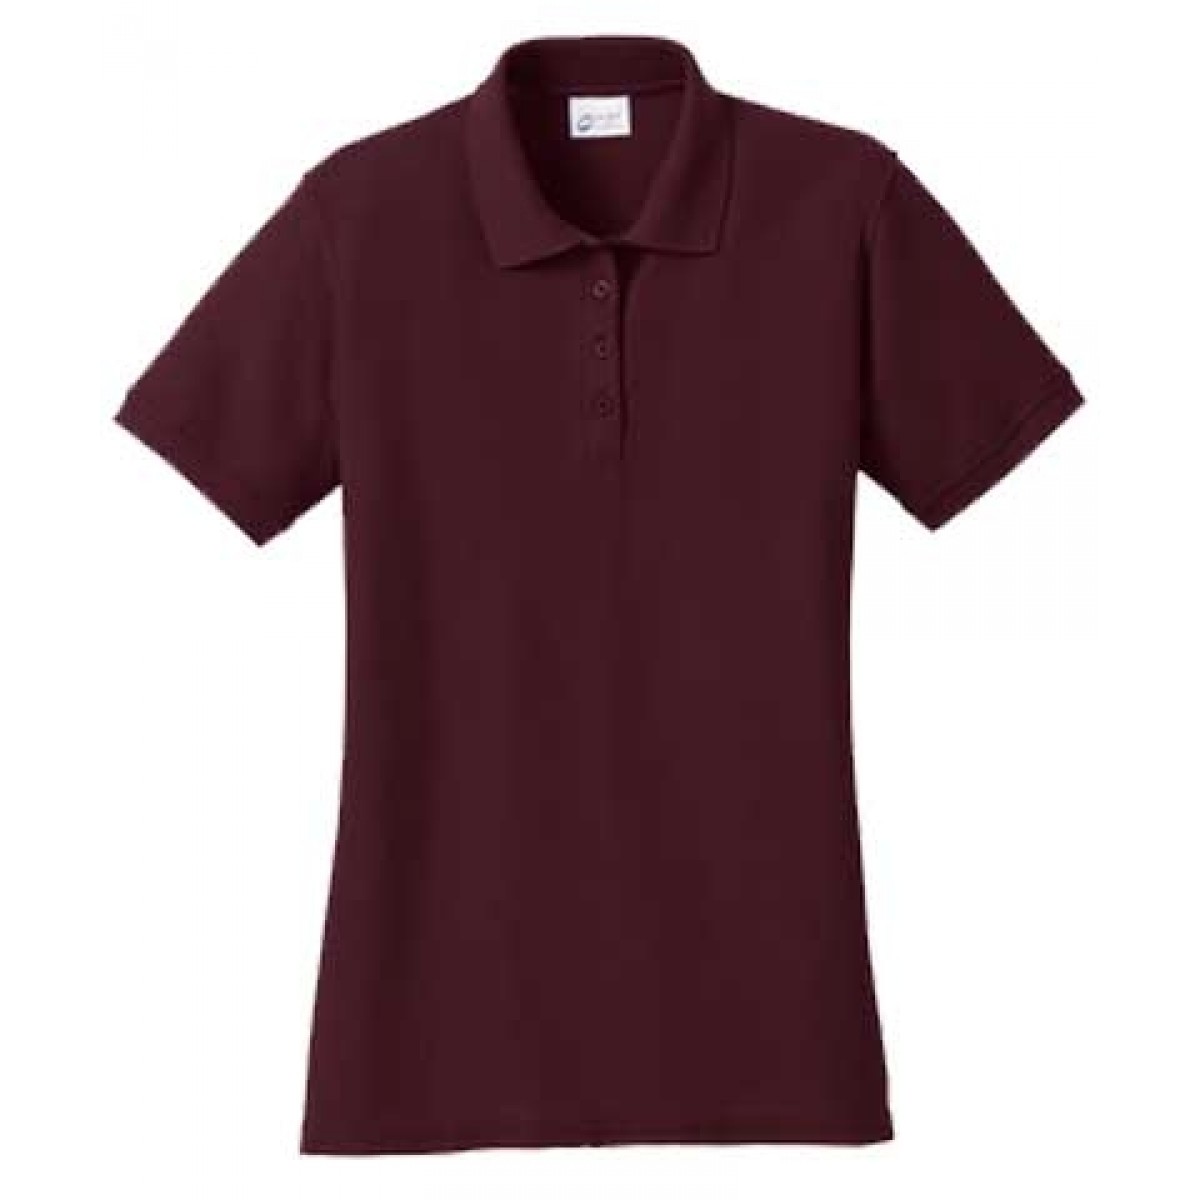 Ladies' Polo - Click for Color Options-Cardinal Red-XL